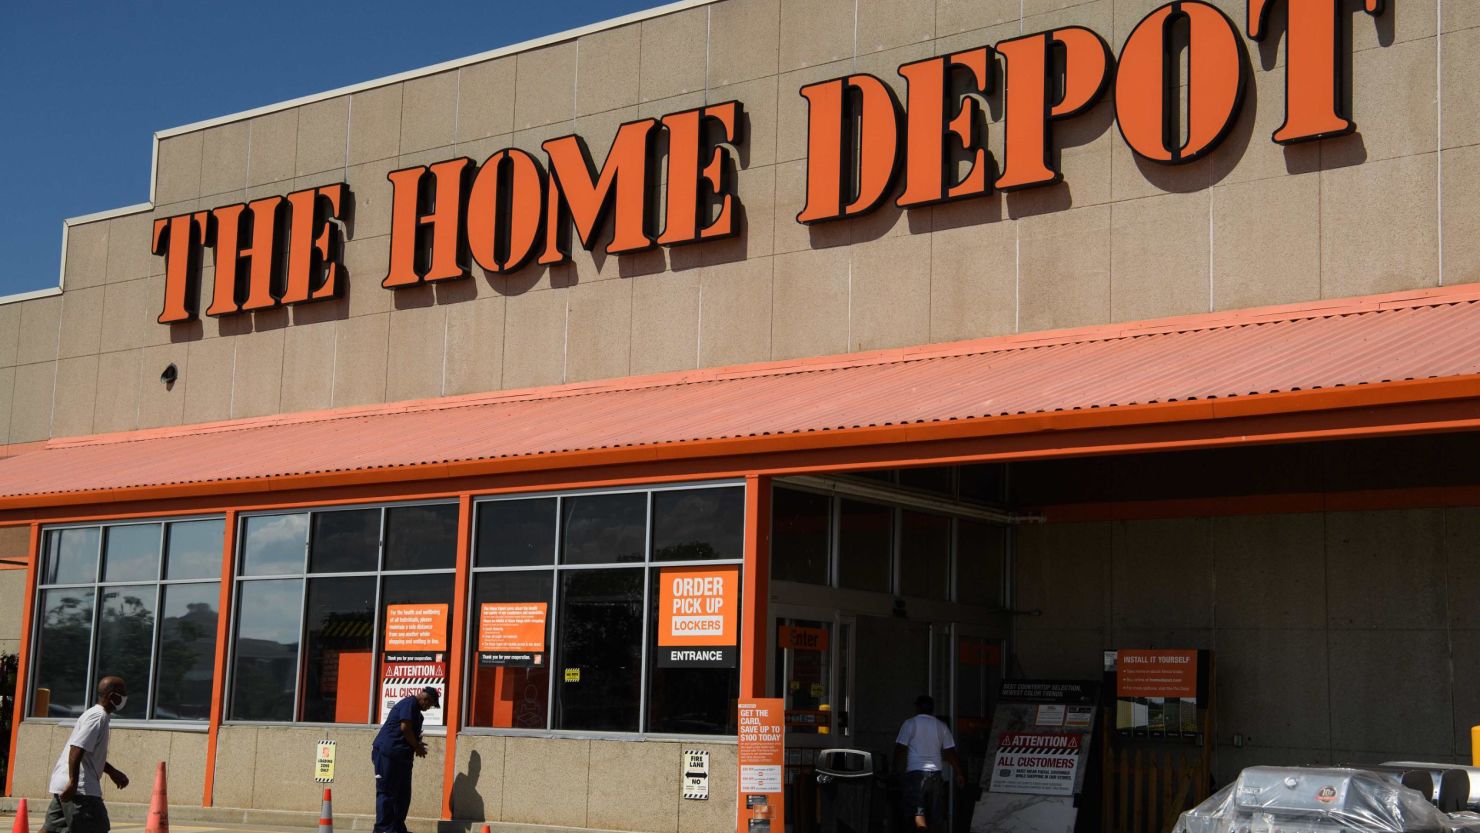 A Home Depot store is seen in Washington, DC, on August 18, 2020. - US retailers were helped by the 2.2 trillion USD CARES Act stimulus package passed in late March which included one-time payments of 1,200 USD to all Americans as well as an additional 600 USD in weekly unemployment benefits for people who lost their jobs. Home Depot said stimulus payments also played a role in that company's 24.5 percent rise in second-quarter profits to $4.3 billion, as home-bound customers invested in home improvement projects like deck building, painting and landscape work. (Photo by NICHOLAS KAMM / AFP) (Photo by NICHOLAS KAMM/AFP via Getty Images)